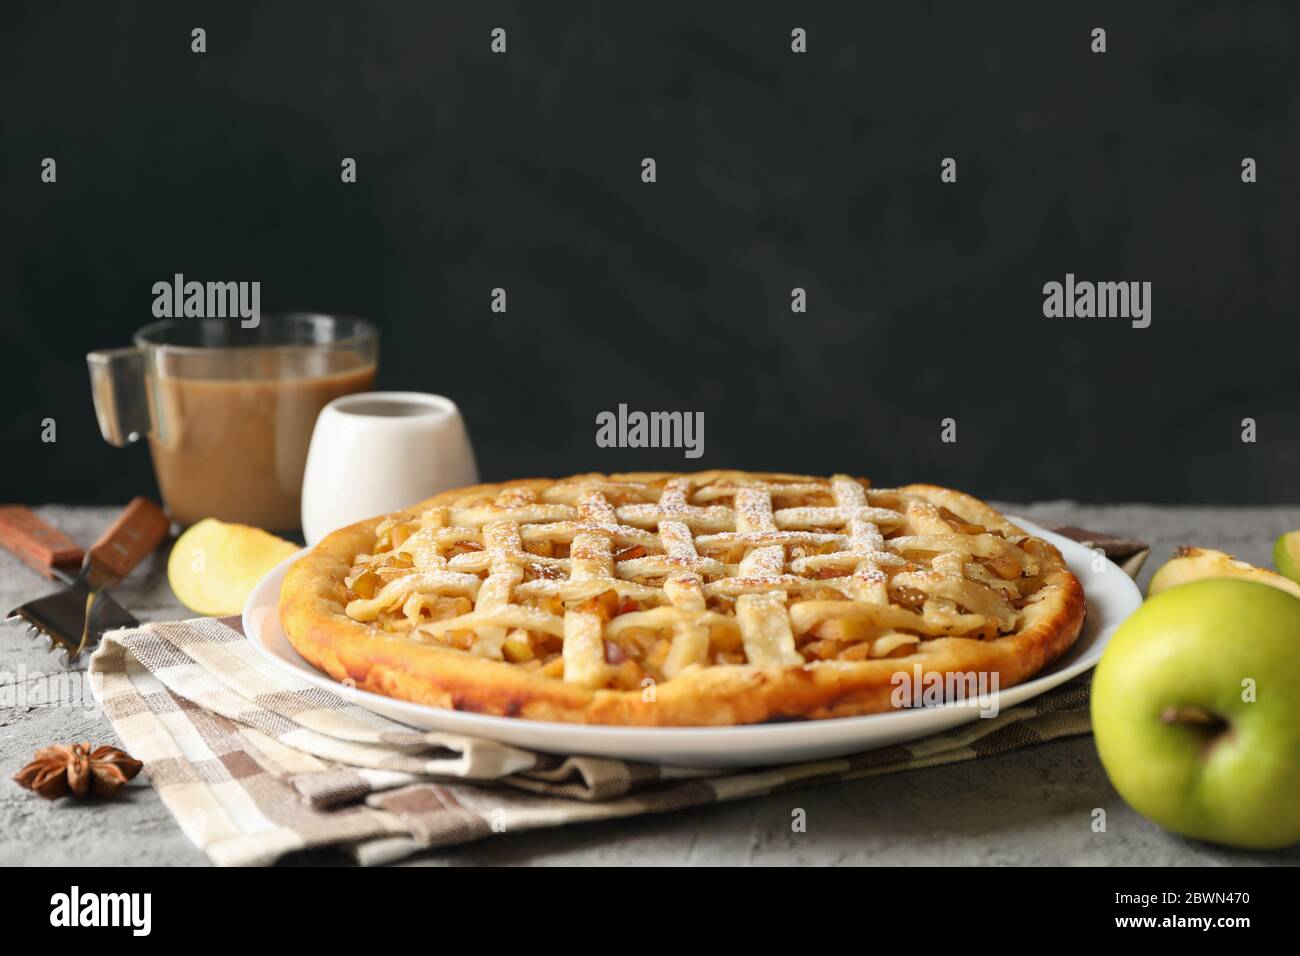 Composition with apple pie and ingredients on gray background. Homemade food Stock Photo